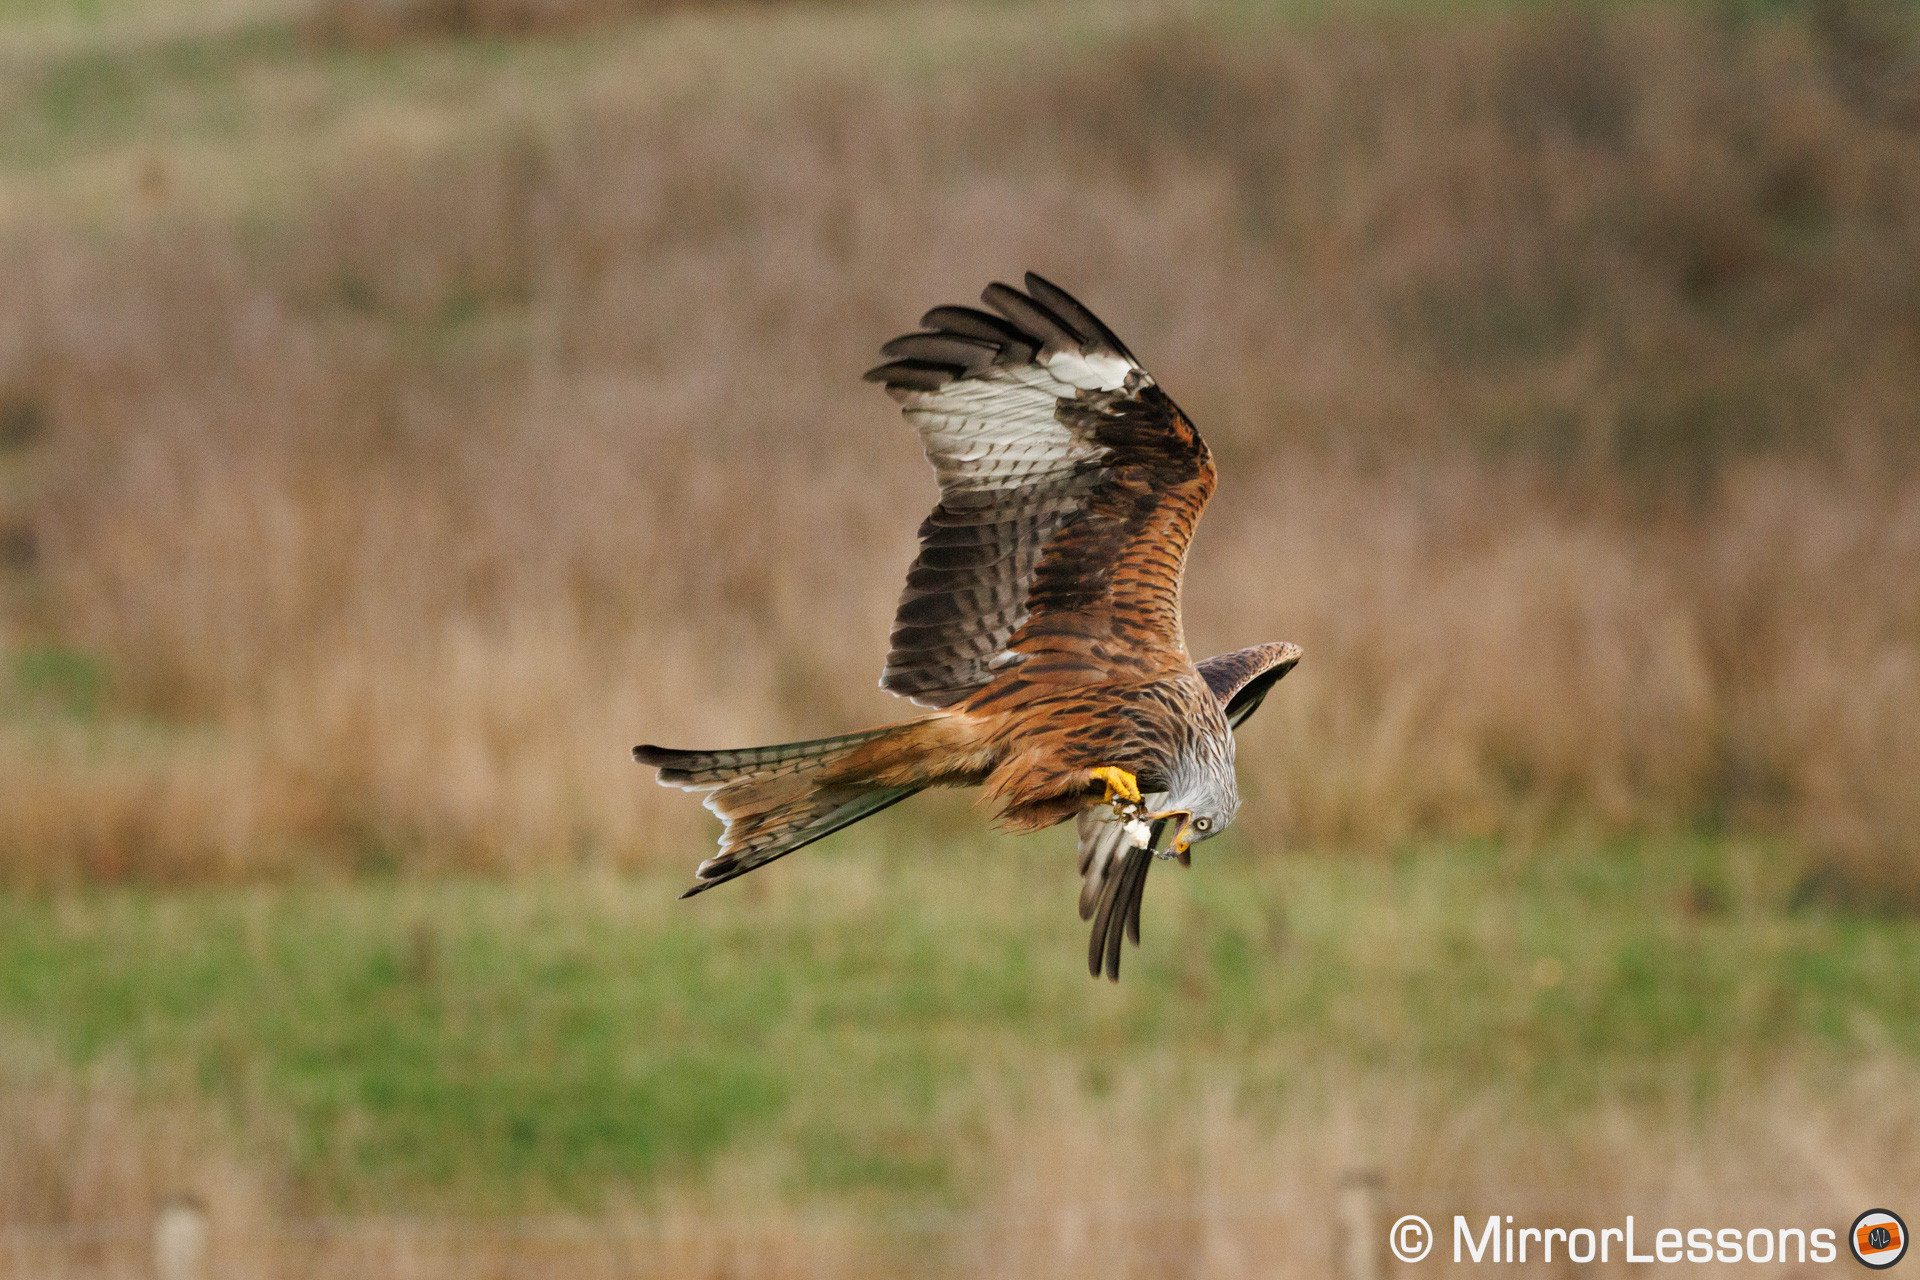 Red Kite flying and eating a piece of meat.